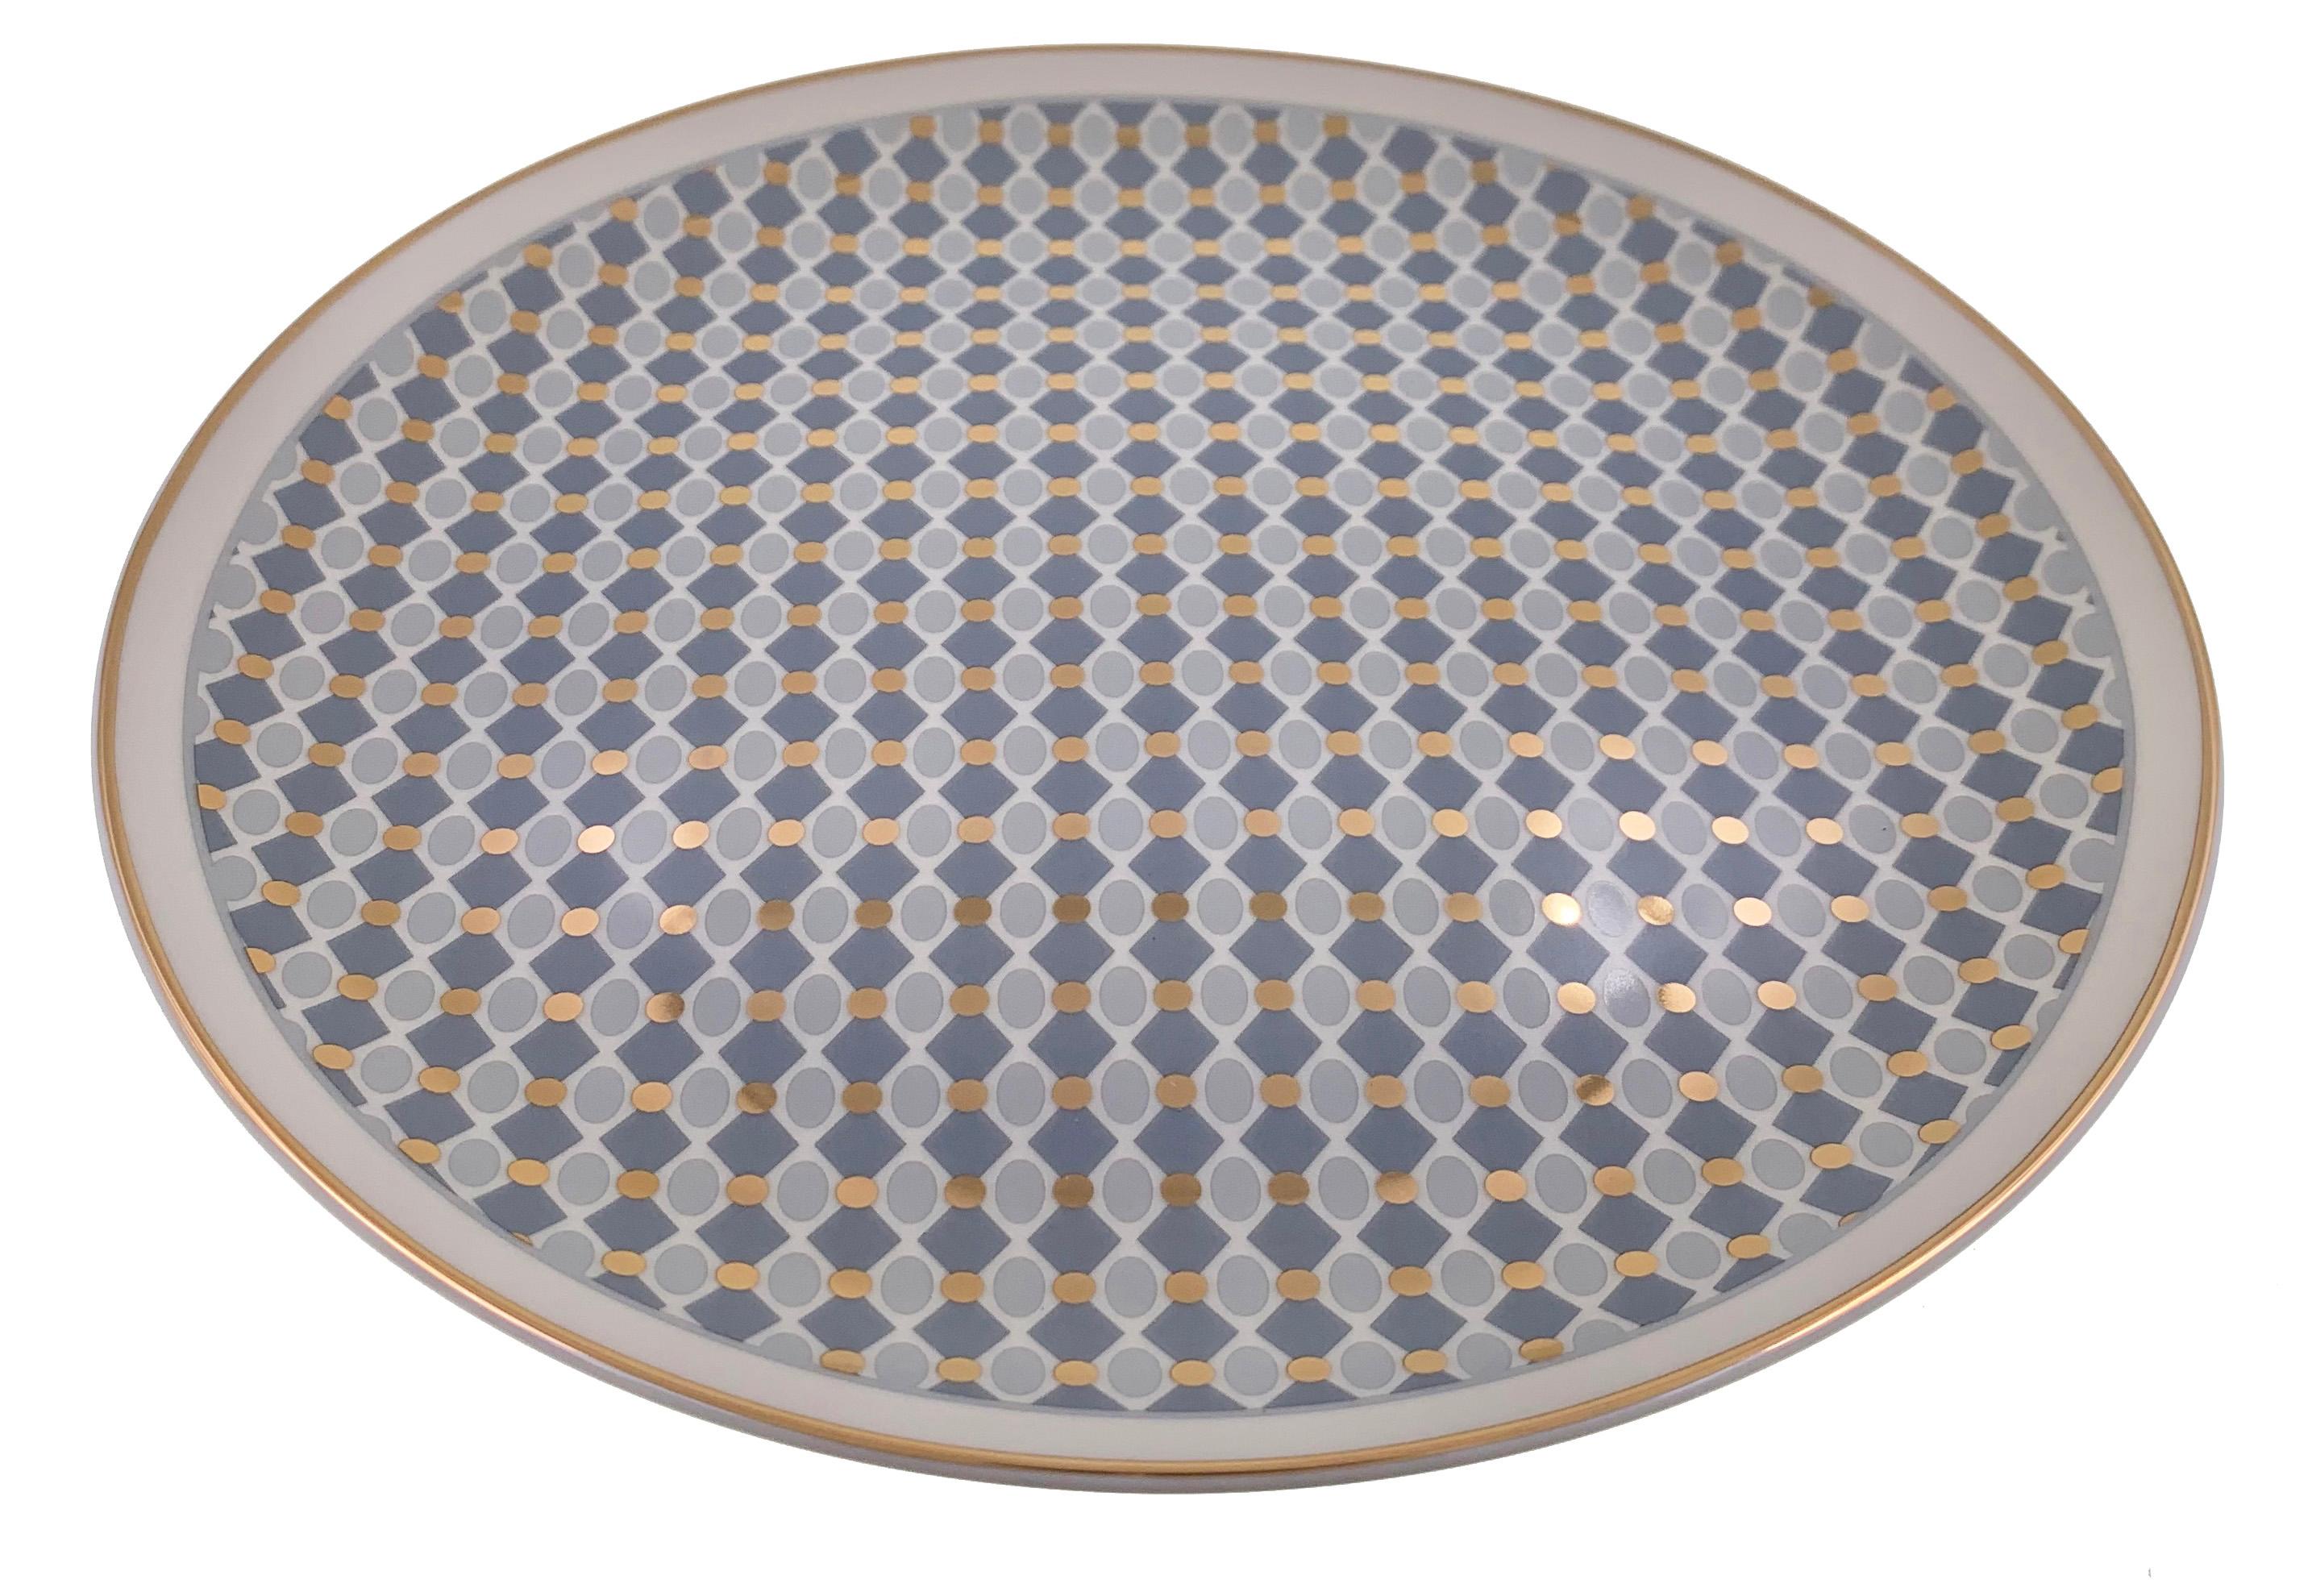 Larger quantities available upon request, with 8 weeks production time.

Description: Dinner plate full pattern (2 pieces)
Color: Blue and gold
Size: 26.5 Ø x 2.5 H cm
Material: Porcelain and gold
Collection: Modern Vintage